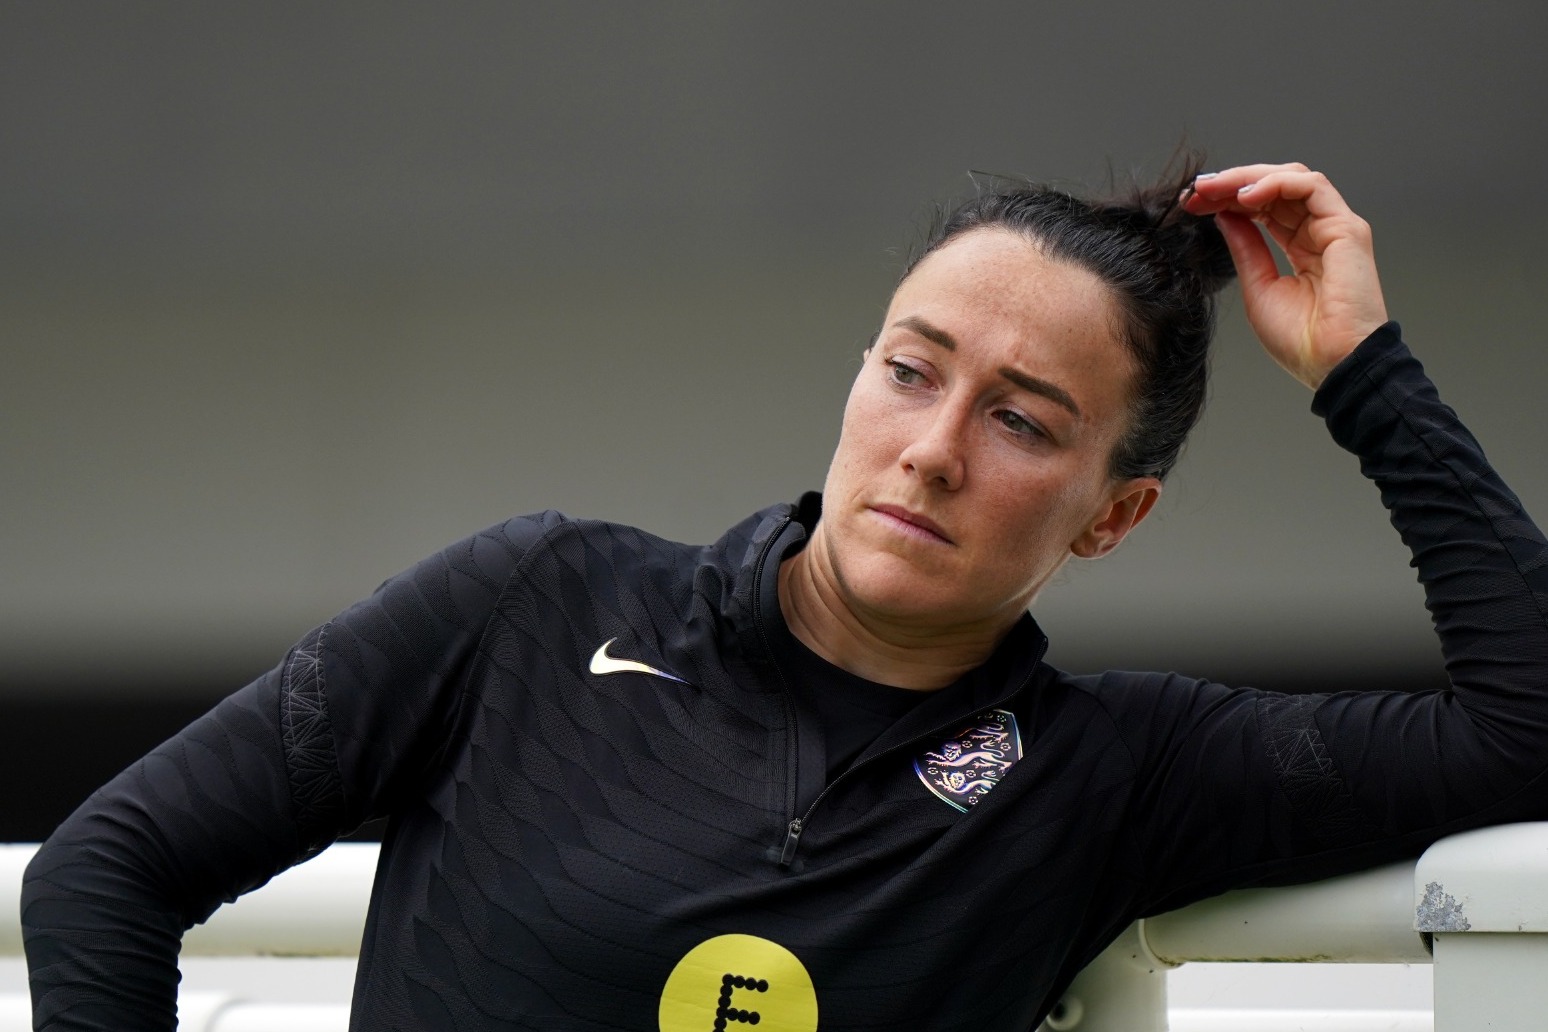 England Women hope to learn from Three Lions reaching Euros final – Lucy Bronze 